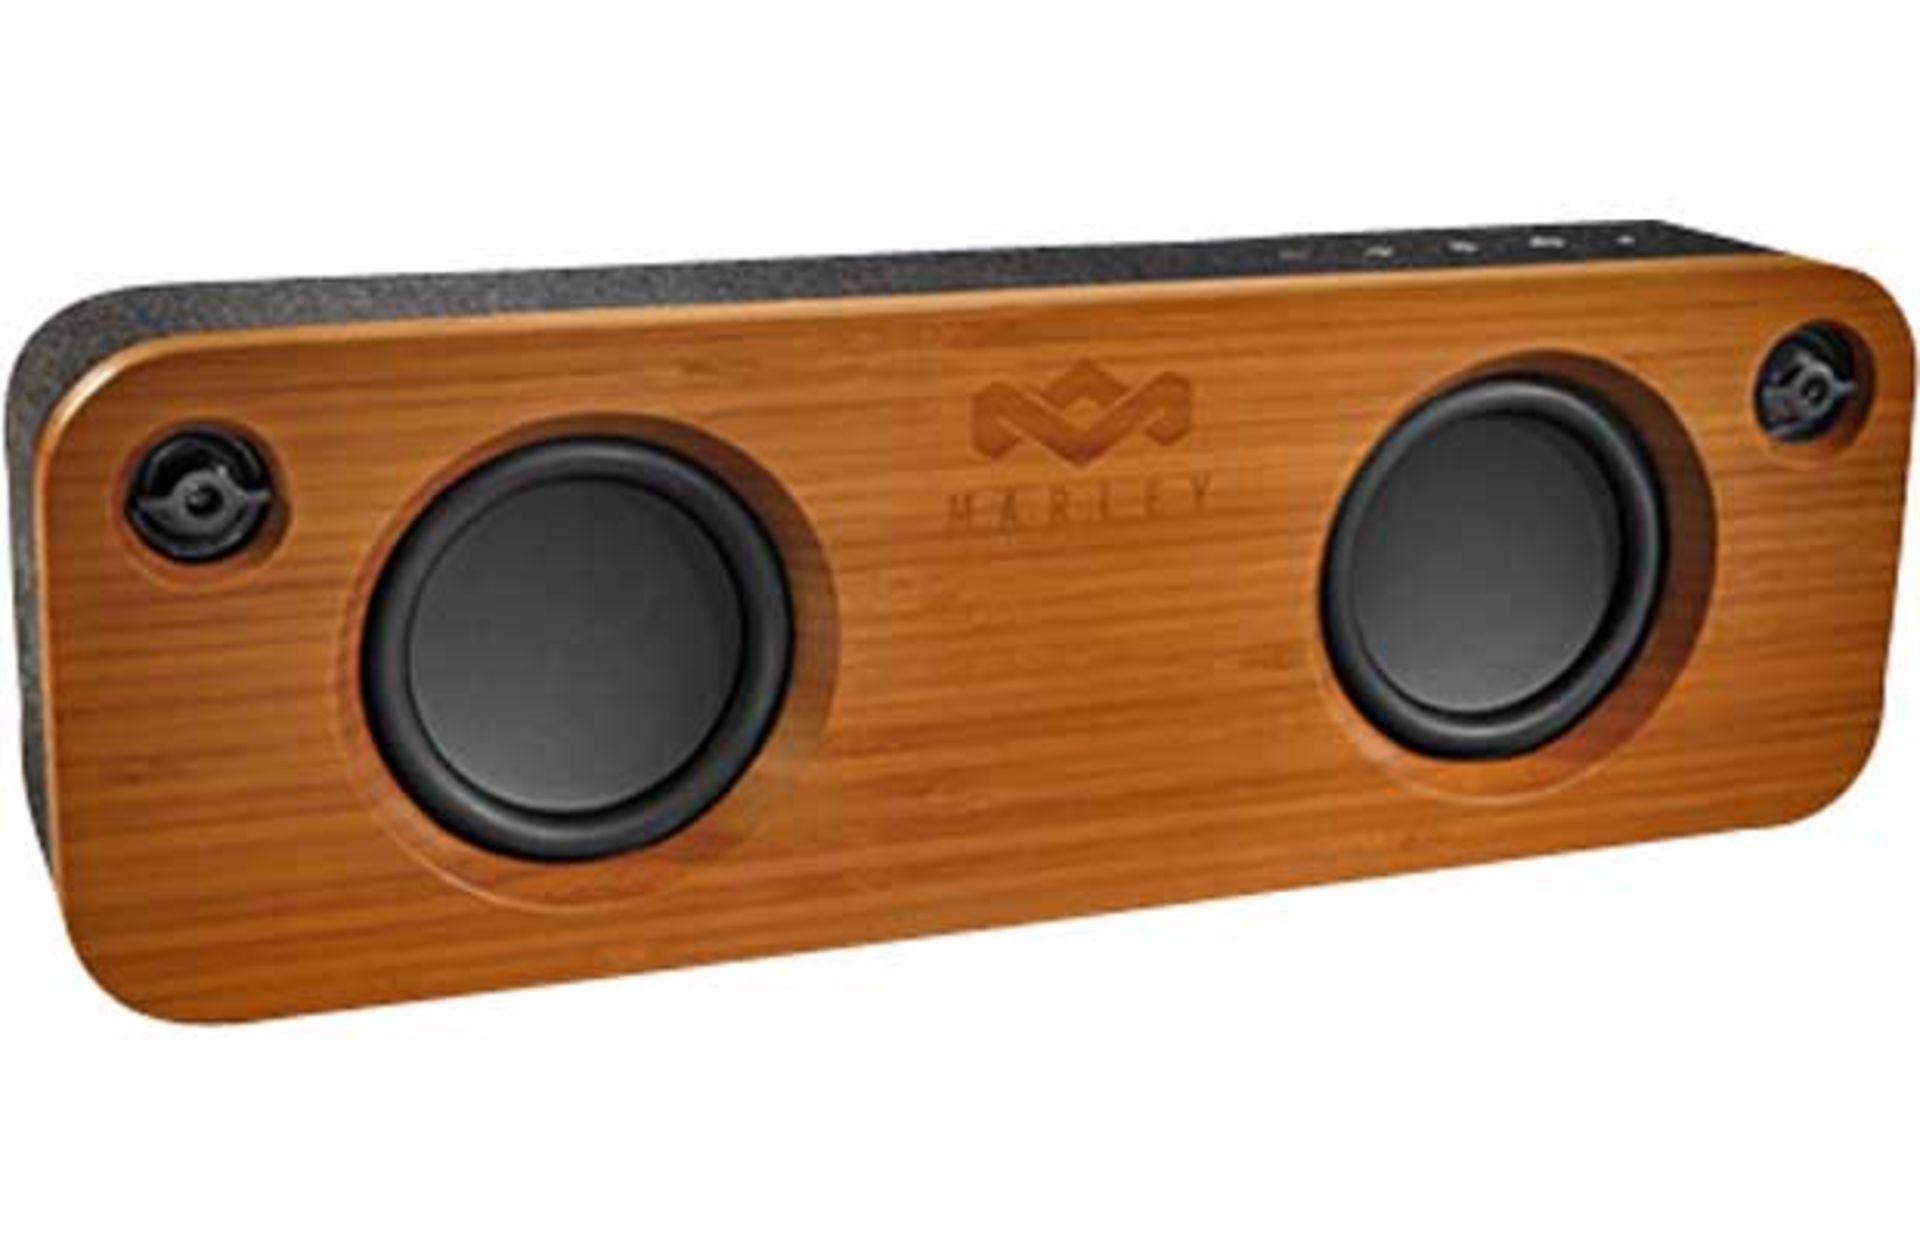 V Grade A Marley Get It Together Portable Audio System - Bluetooth - 8 Hour Battery - Exclusive - Image 2 of 2